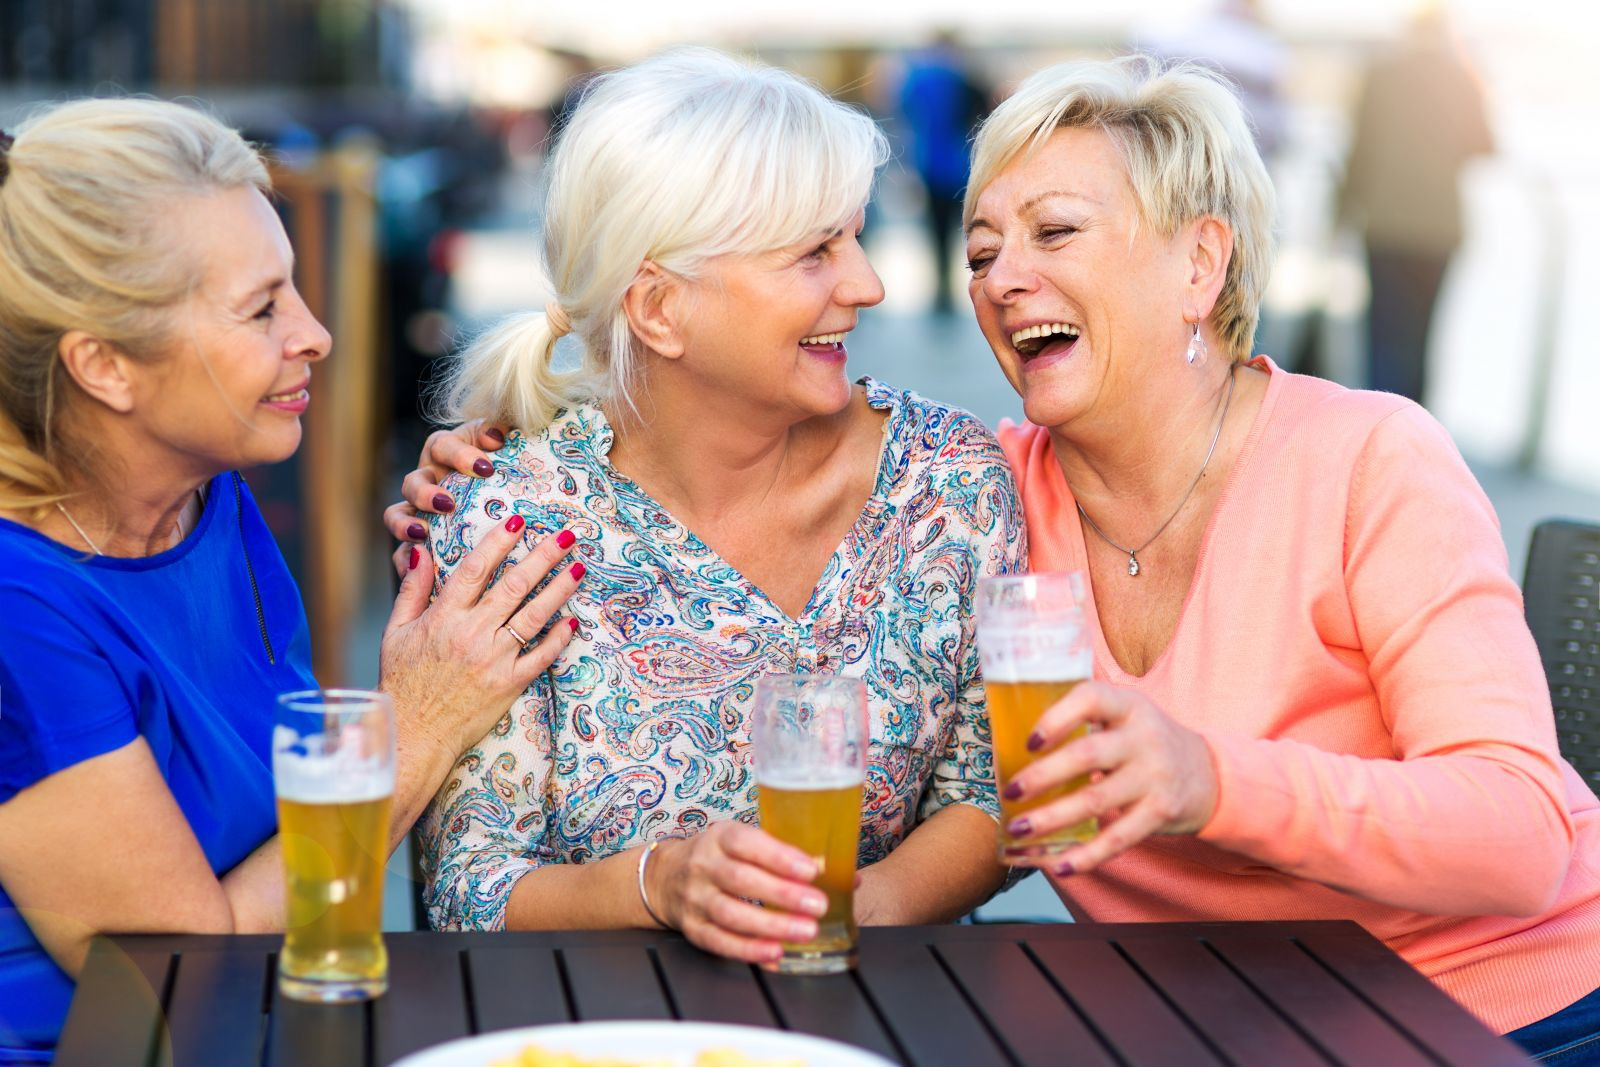 Three mature woman laughing while having beers together.